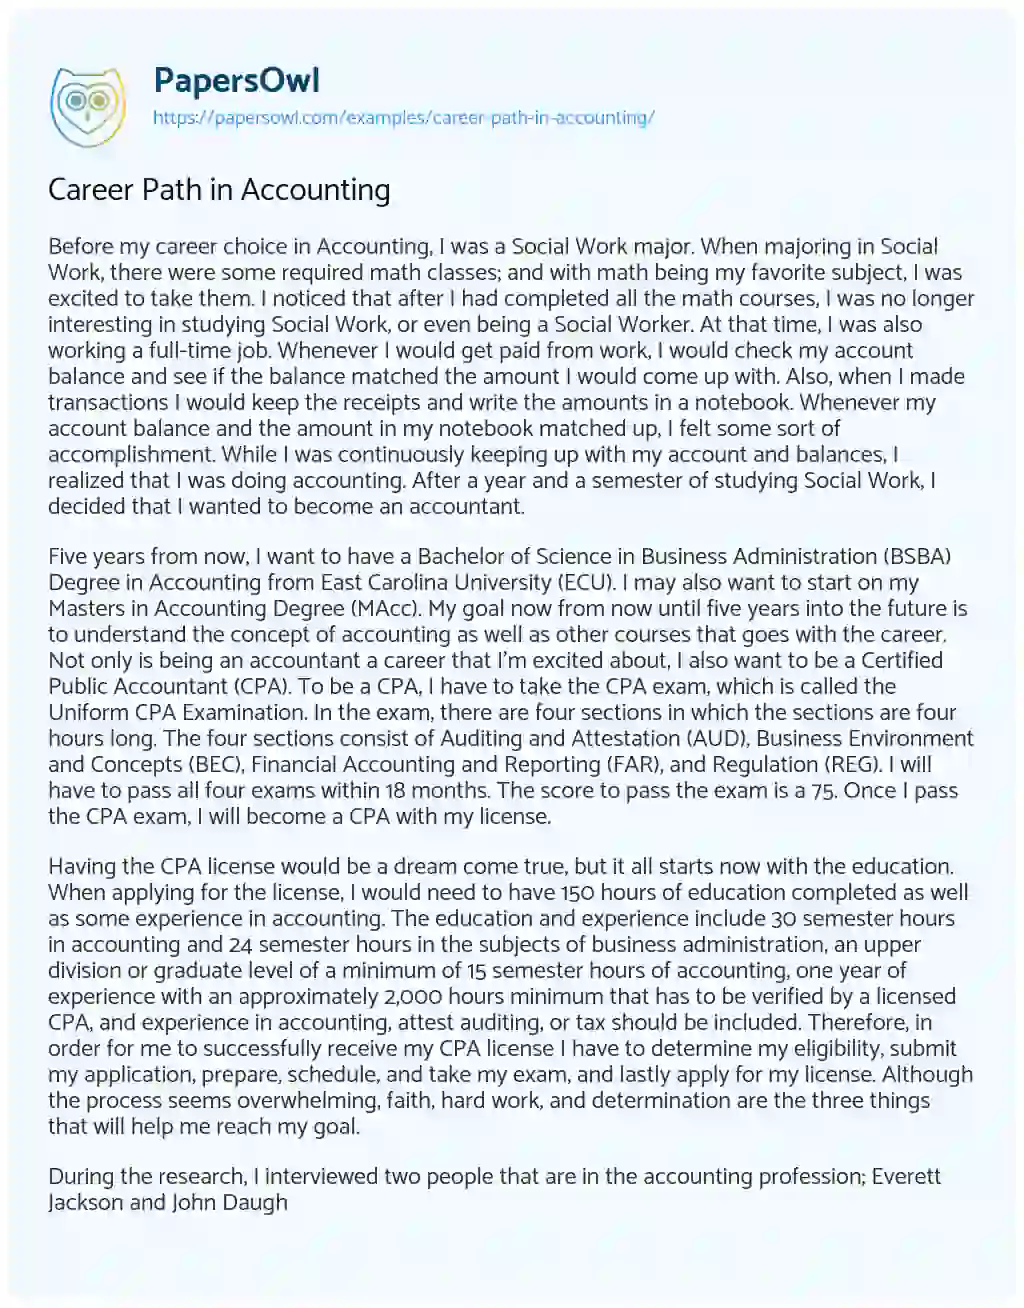 Essay on Career Path in Accounting